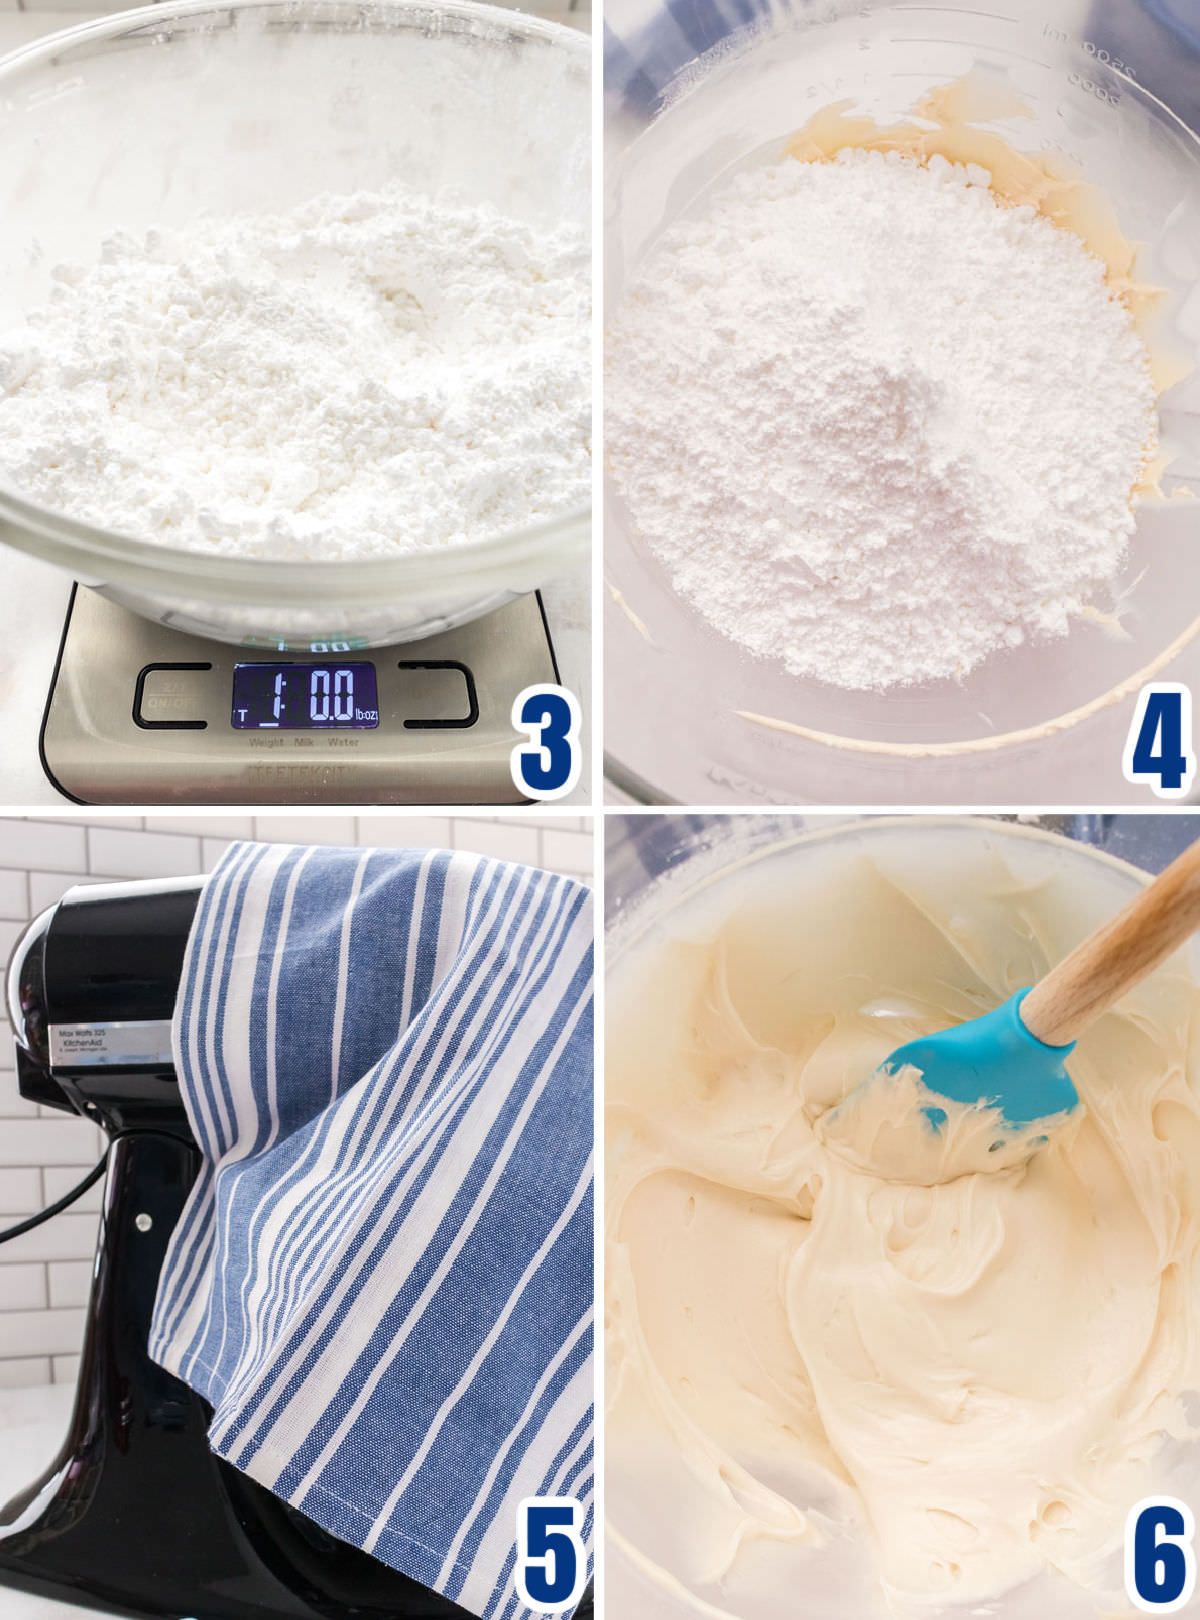 Collage image that shows the steps for mixing the powdered sugar with the Cream Cheese and Butter mixture to make Cream Cheese Buttercream Frosting.